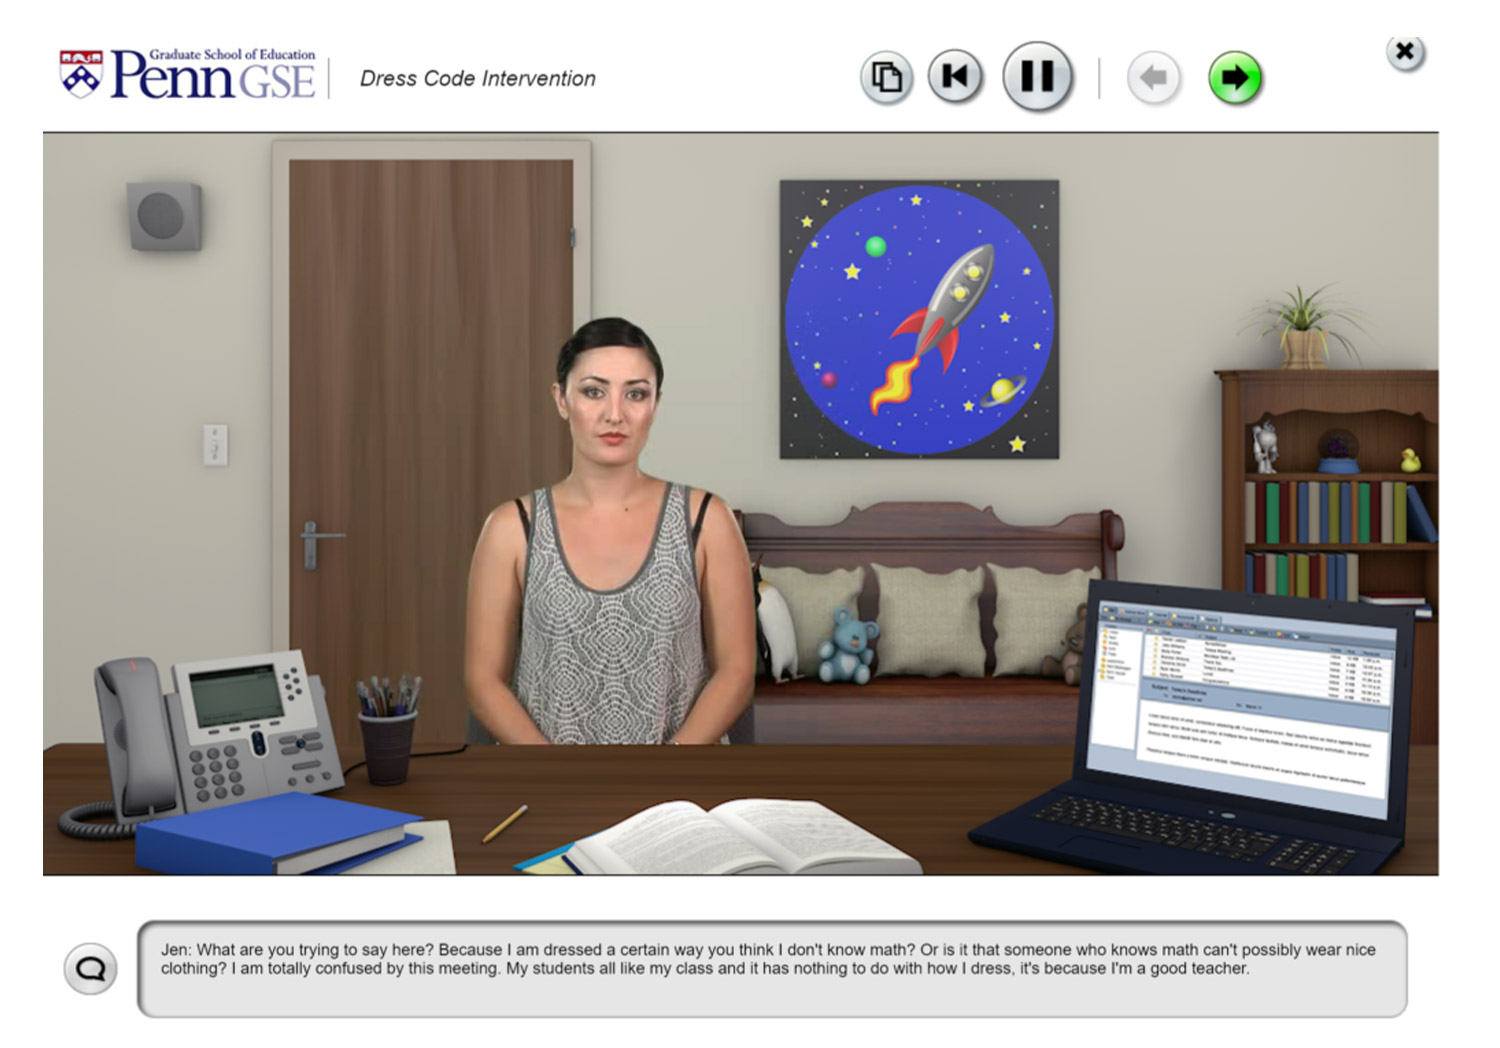 screen capture image from a Penn Graduate School of Education Dress Code Intervention simulation showing a woman wearing a halter top sitting the other side of an office desk